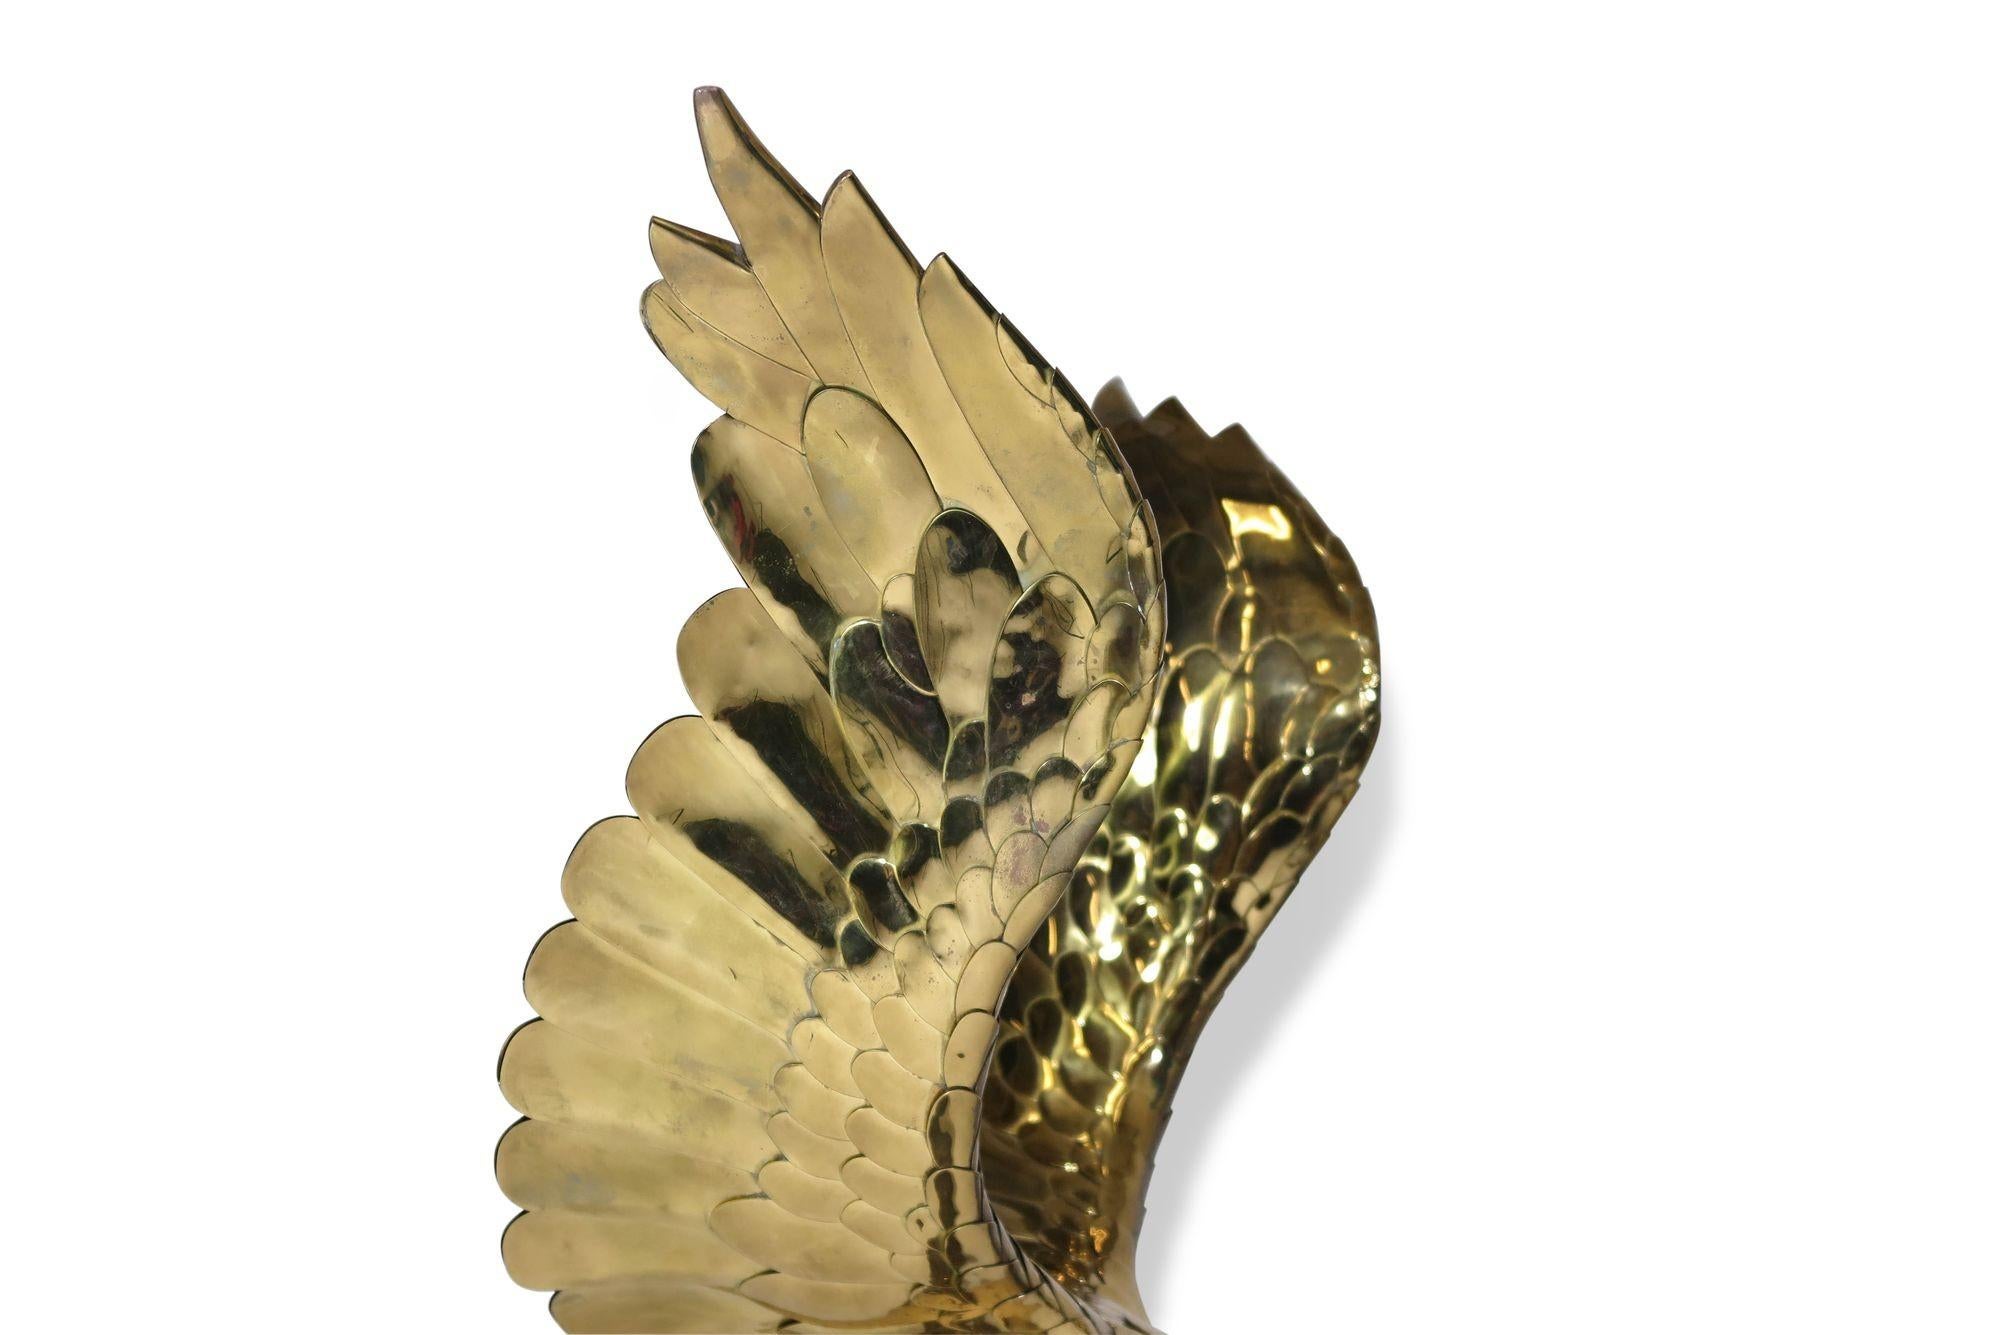 Pair of Alain Chervet Brass Eagles Table Bases, France, 1970 In Good Condition For Sale In Oakland, CA